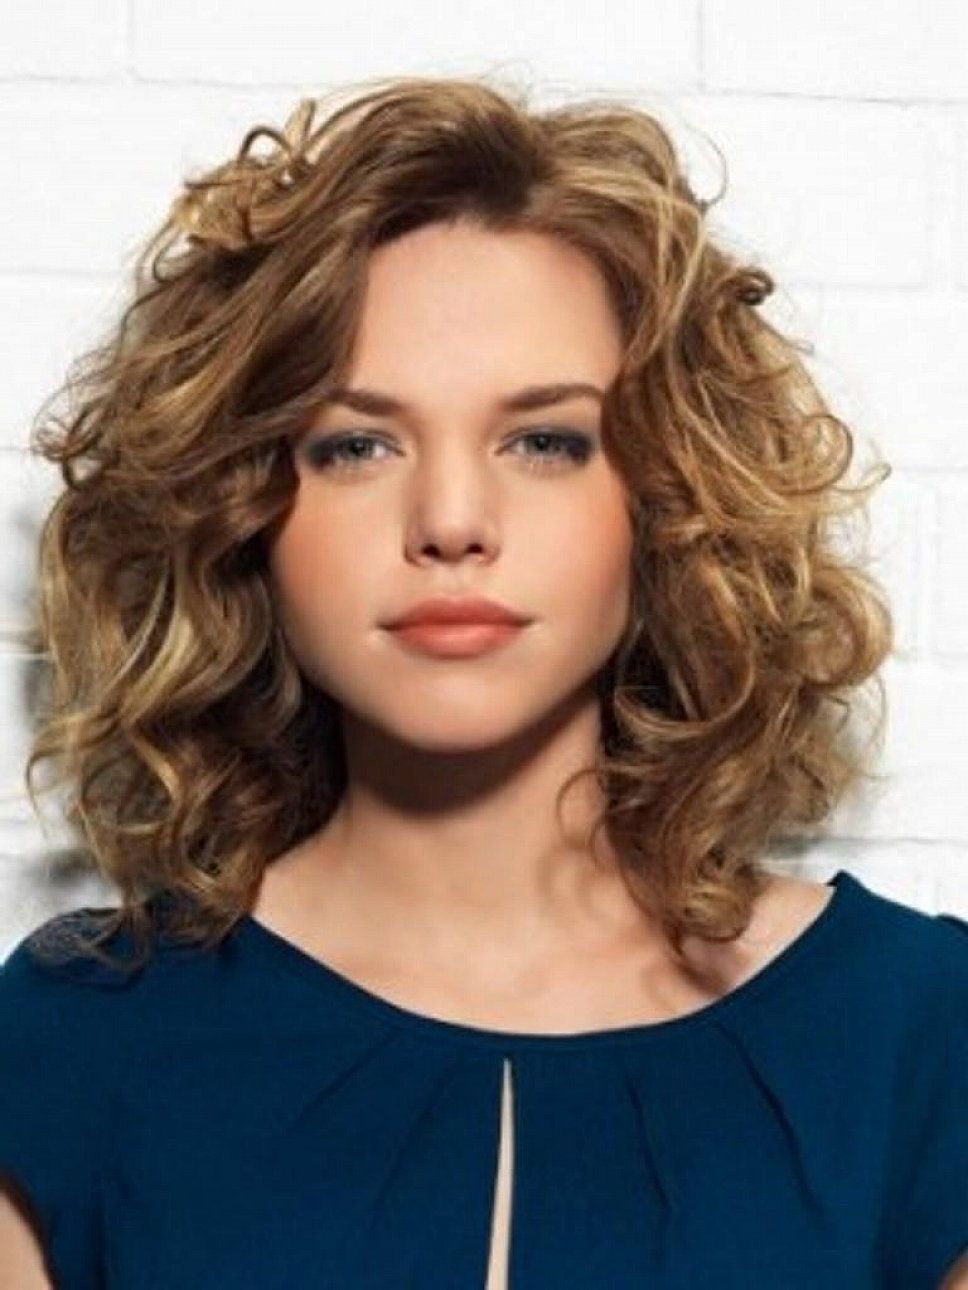 Widely Used Medium Haircuts For Curly Hair And Round Face With Medium Wavy Hairstyle With Swept Bangs For Women With Thick Hair And (View 2 of 20)